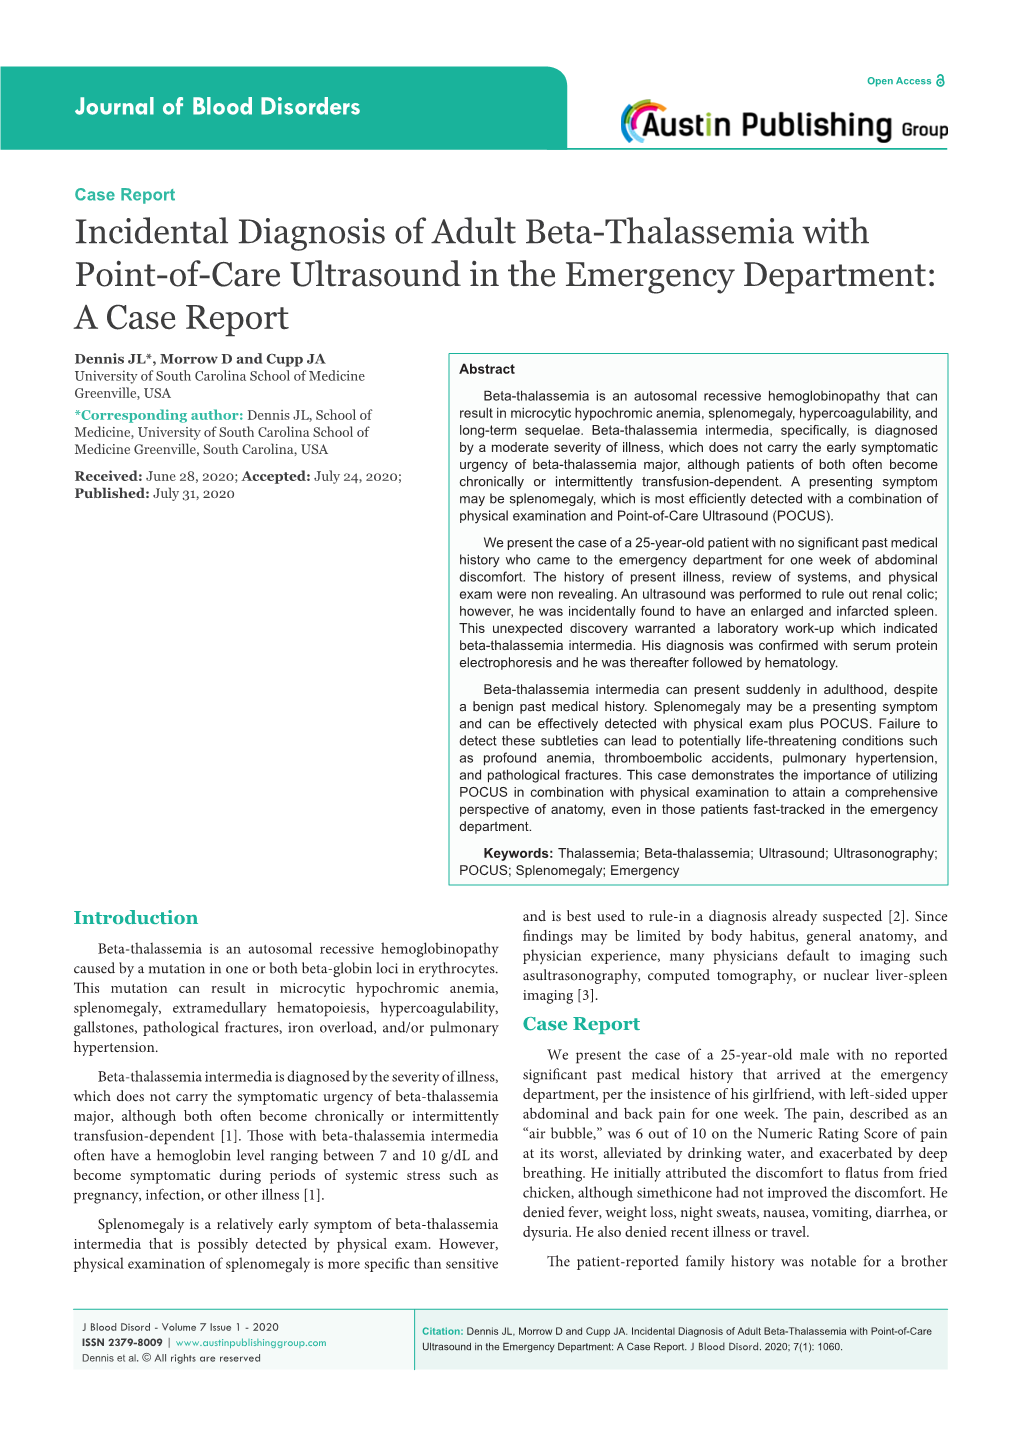 Incidental Diagnosis of Adult Beta-Thalassemia with Point-Of-Care Ultrasound in the Emergency Department: a Case Report